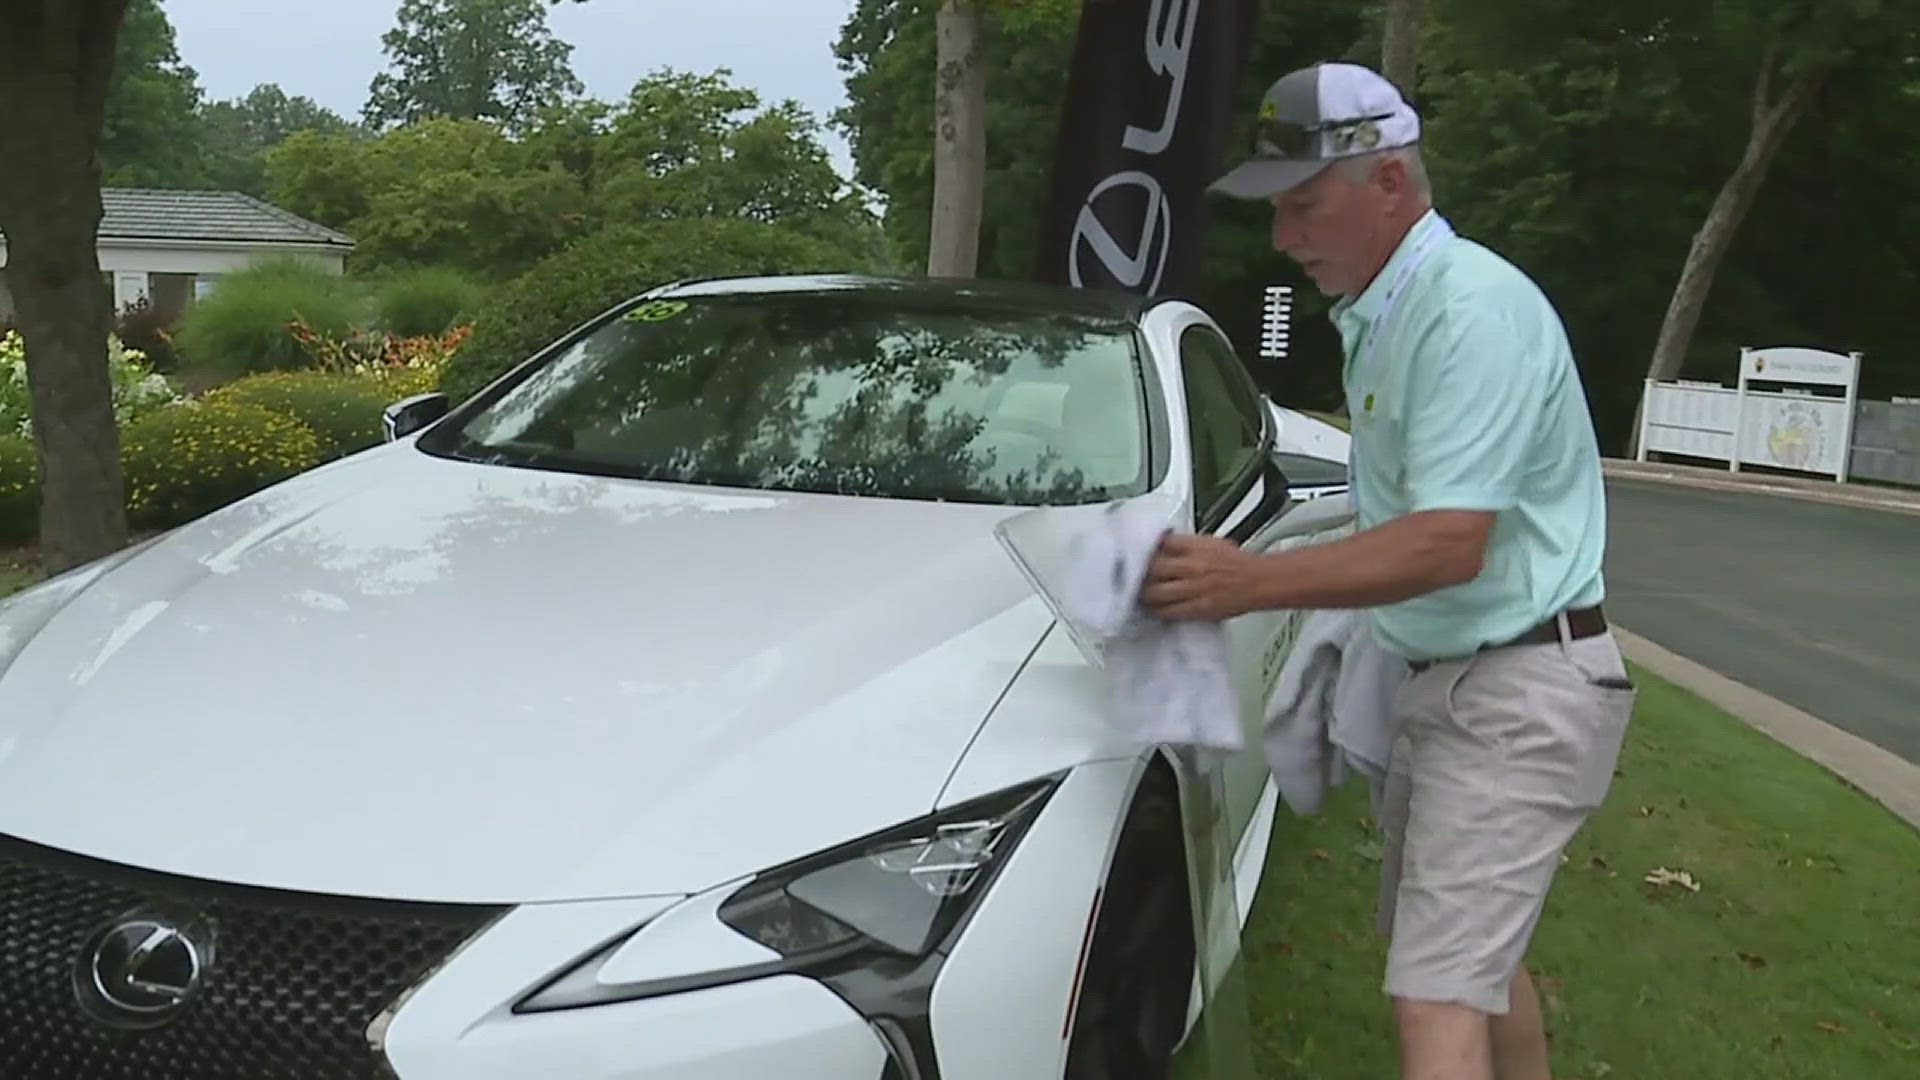 Lexus is the official vehicle of the PGA Tour.